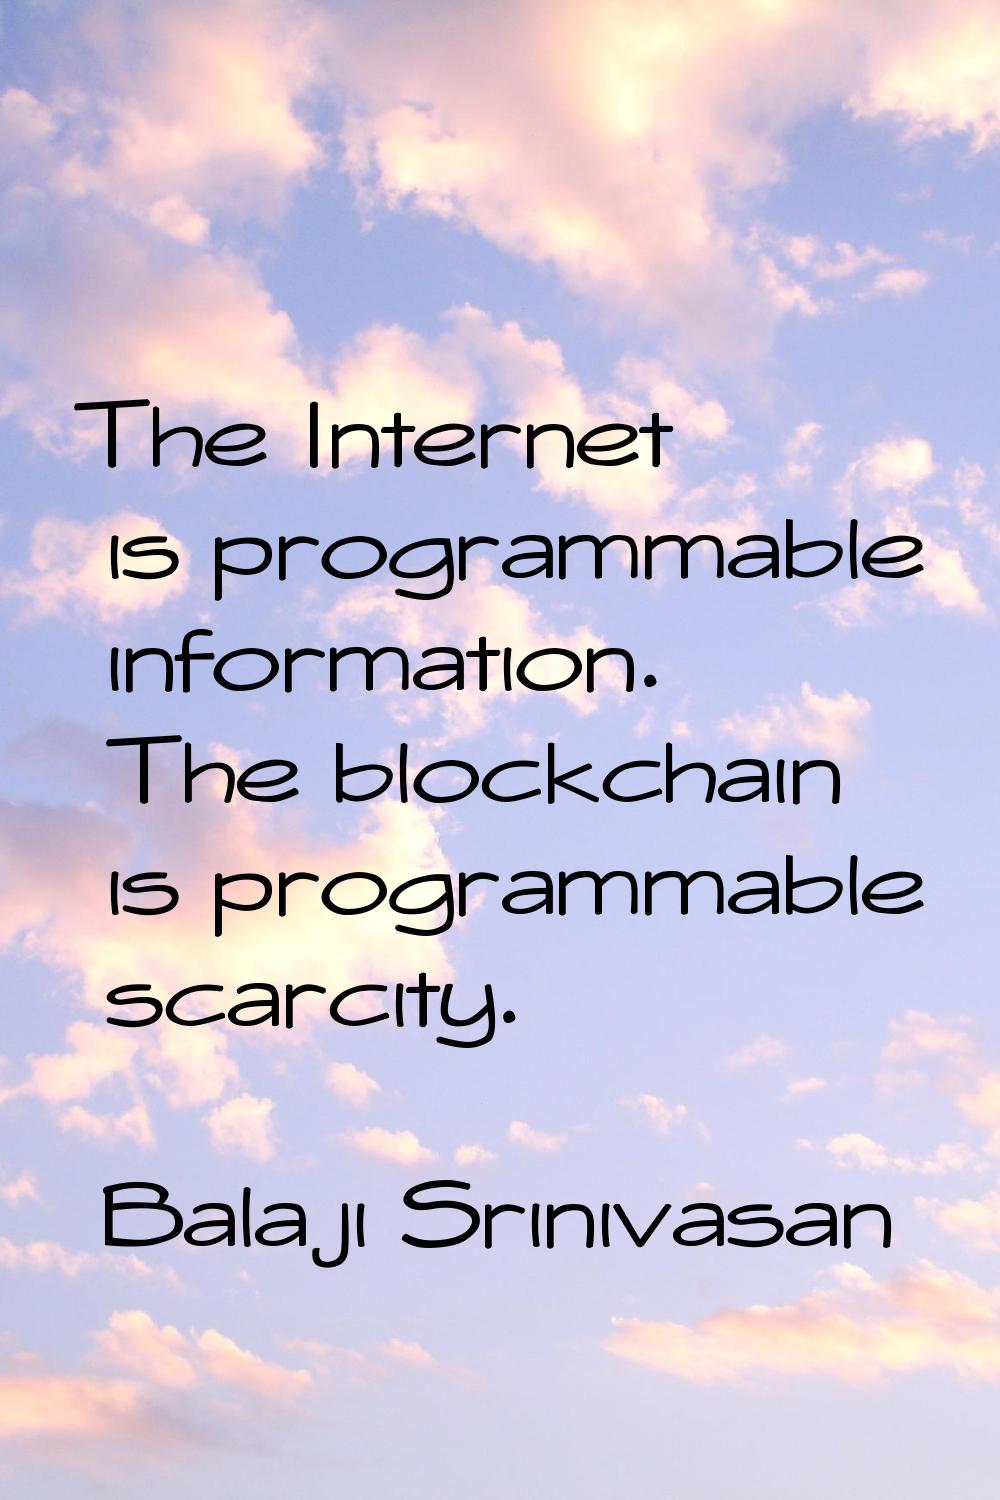 The Internet is programmable information. The blockchain is programmable scarcity.